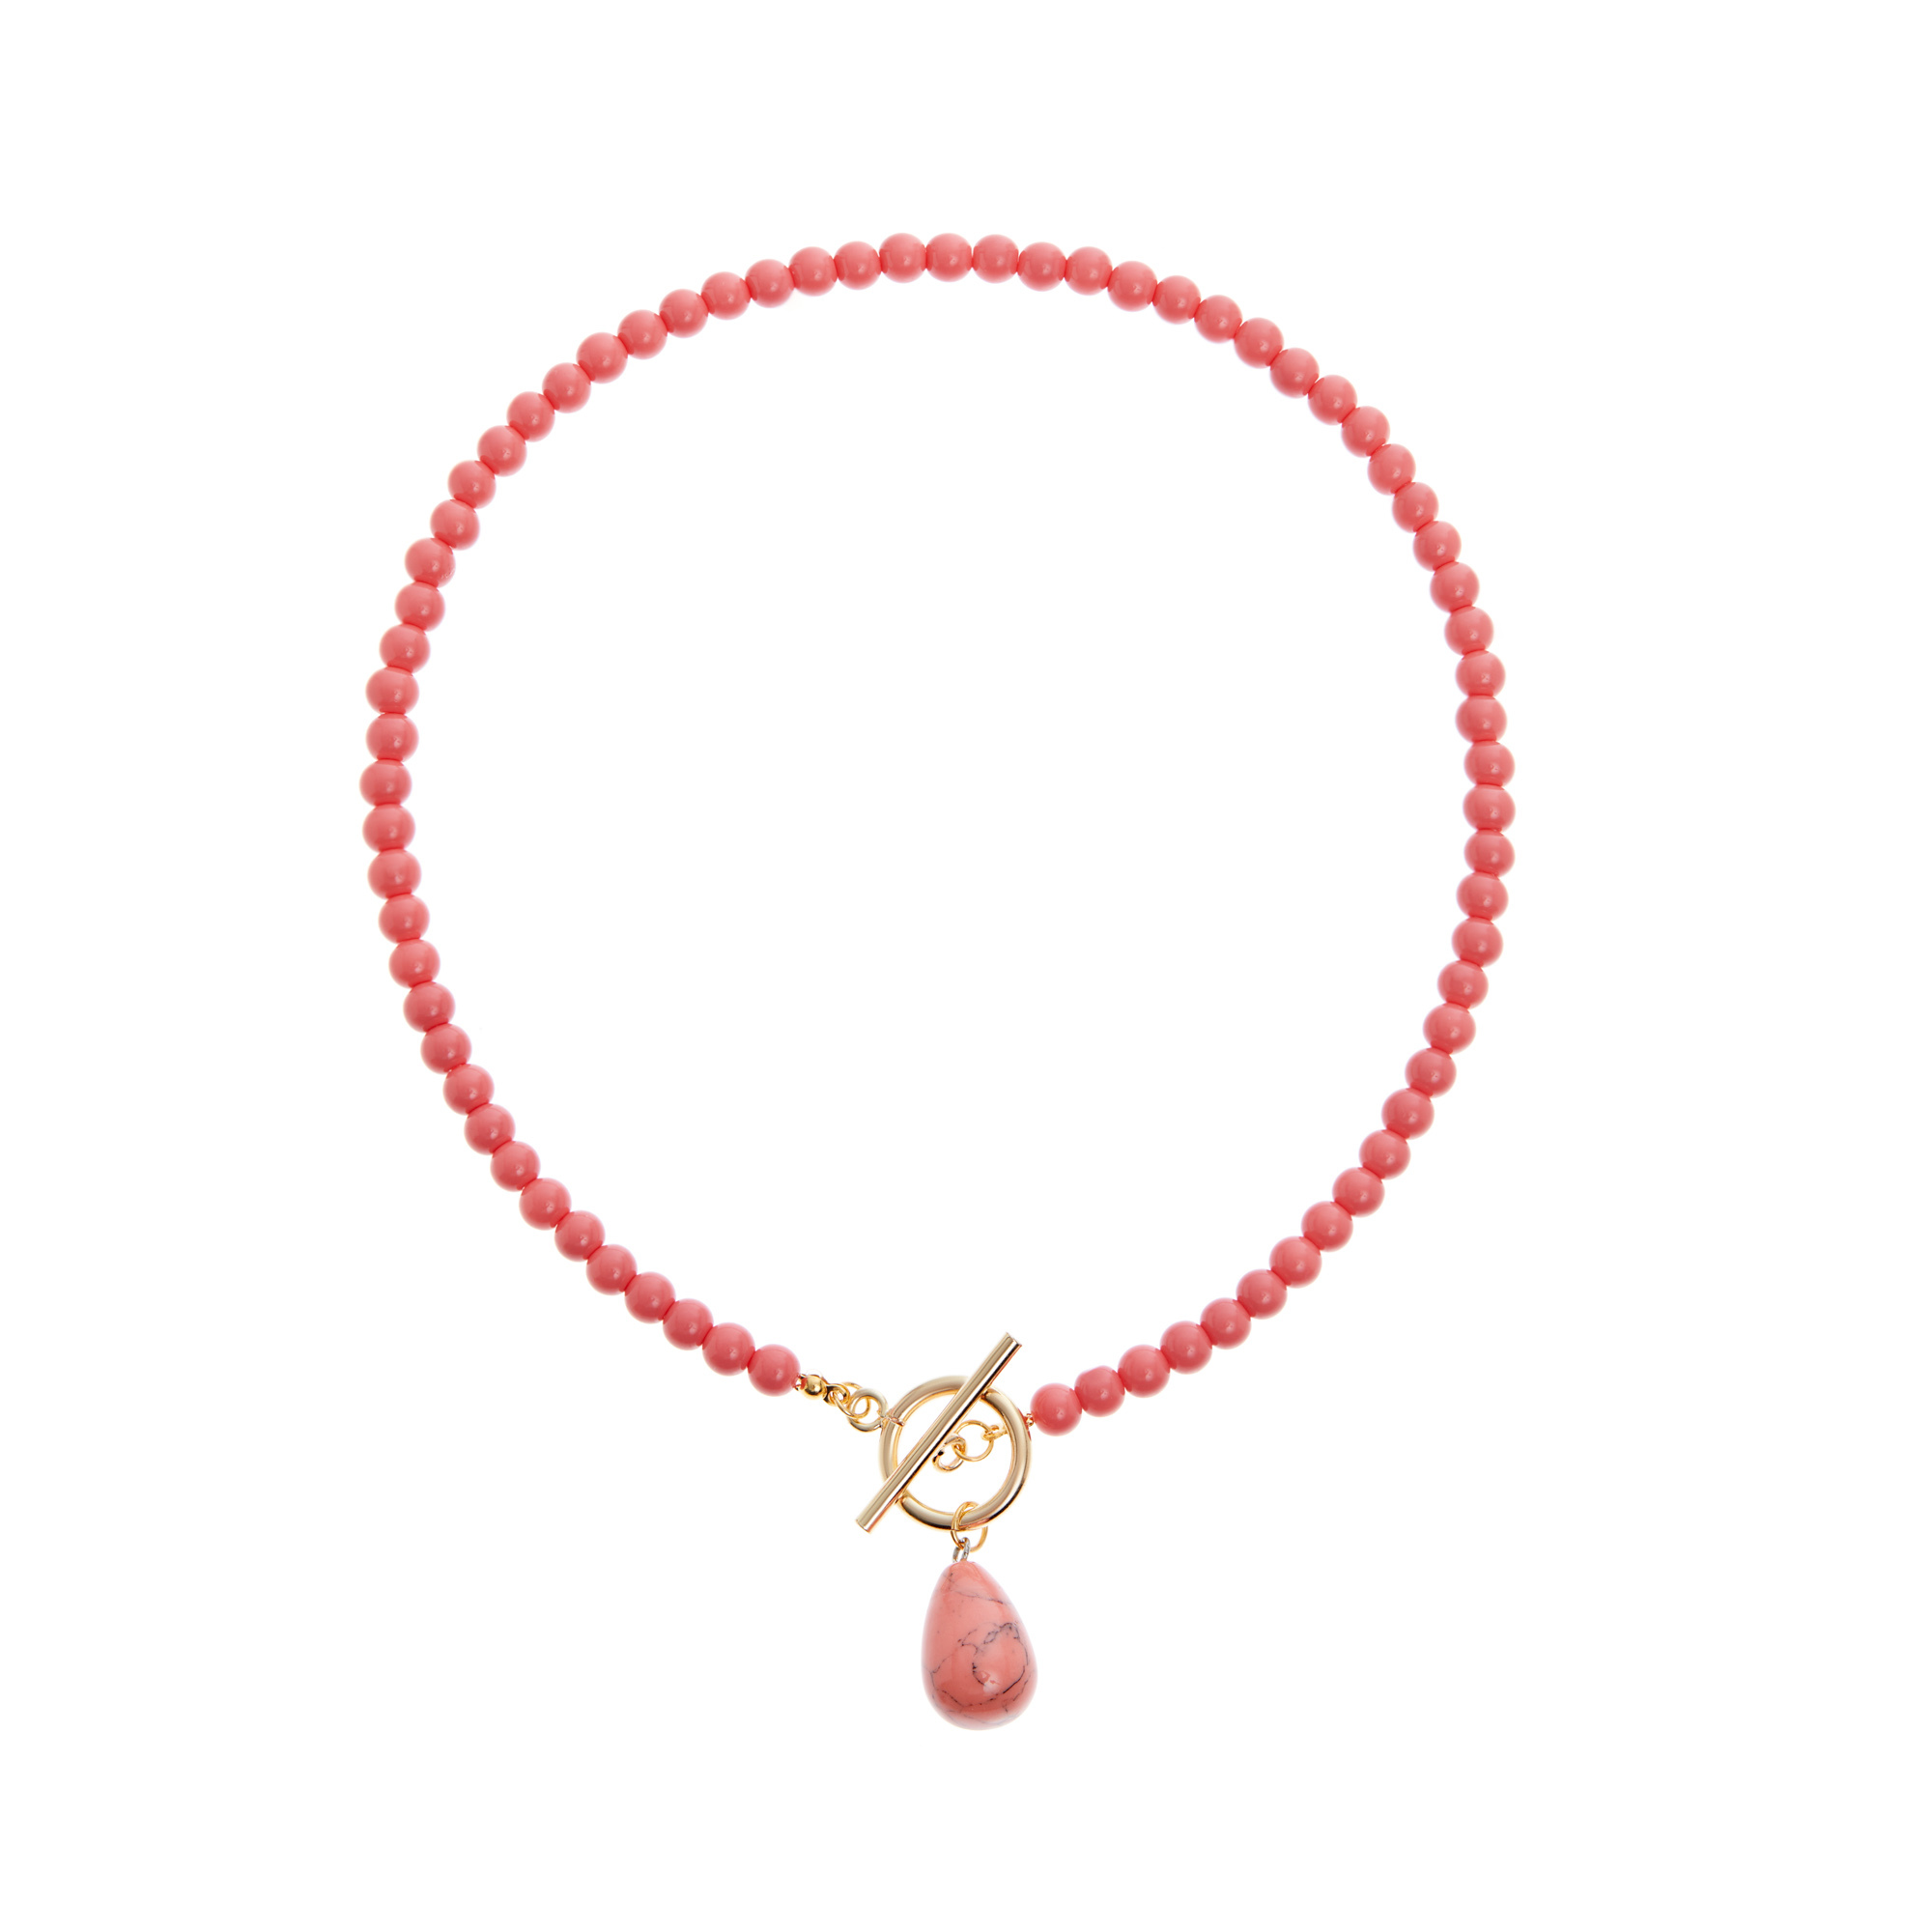 HOLLY JUNE Колье Drop Necklace – Coral holly june колье coral reef necklace